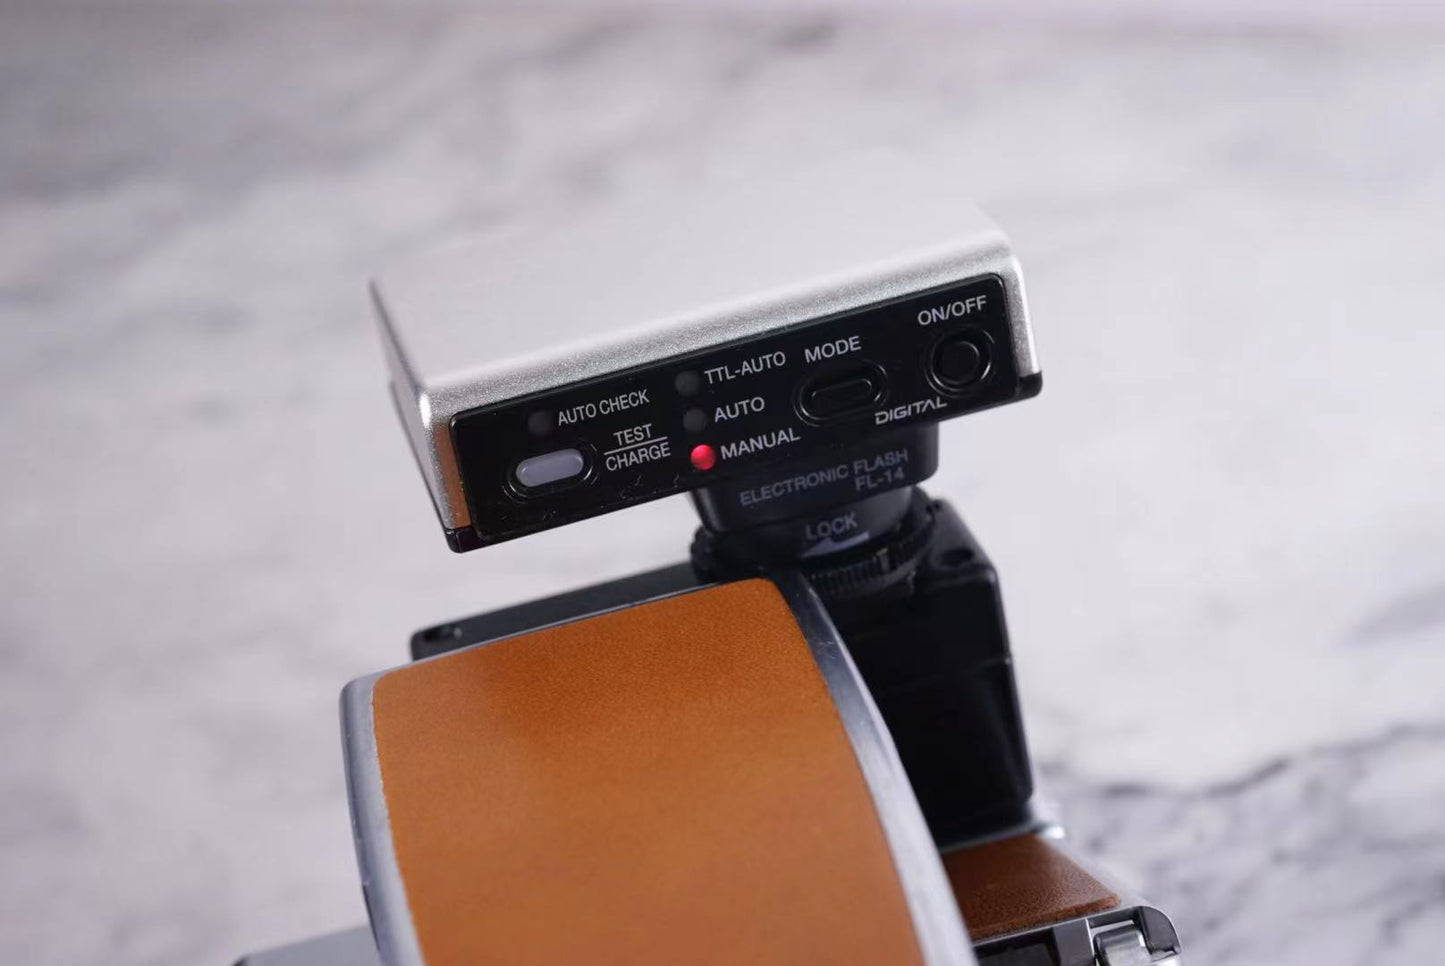 Flash adapters for the Polaroid SX-70、Sonar hot shoe